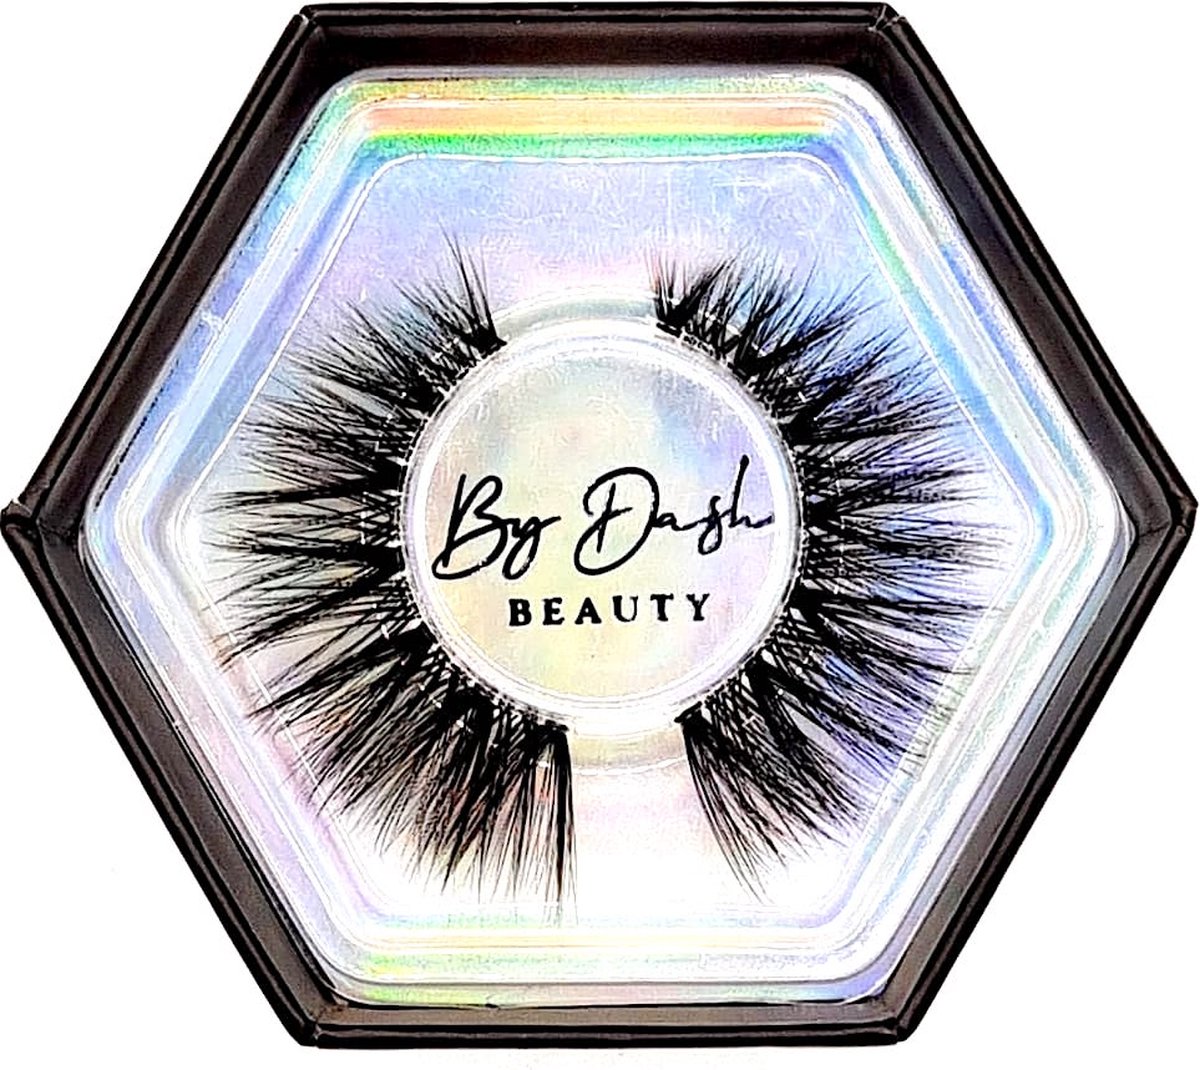 By Dash Beauty - Lash Queen - Valse Wimpers - Nepwimpers - 3D Faux Mink Lashes - Luxury Lashes